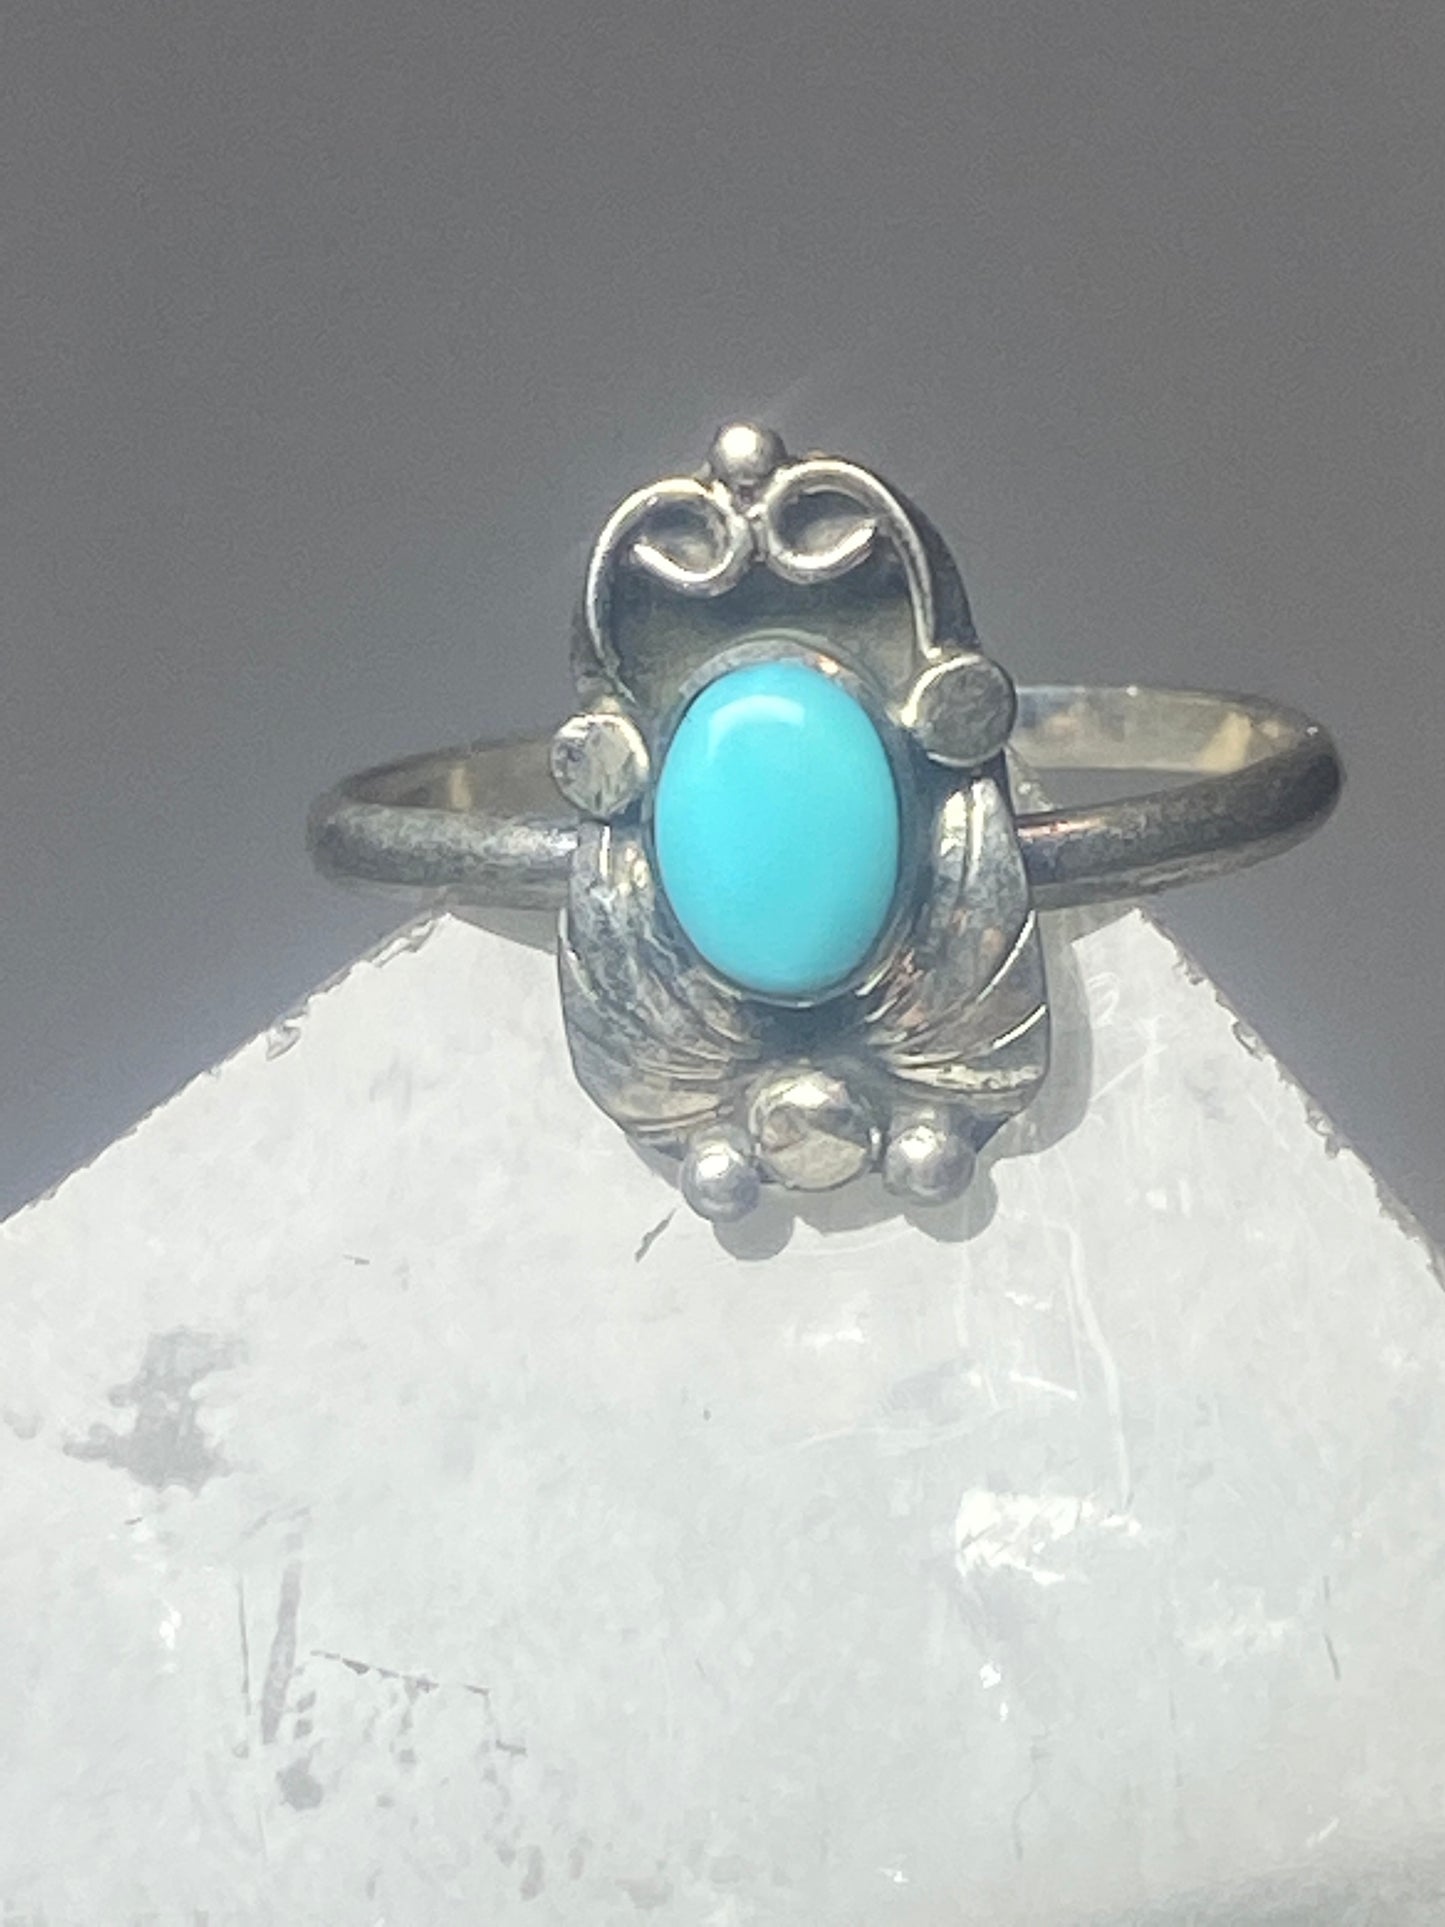 Turquoise ring southwest pinky floral leaves blossom baby children women girls  m